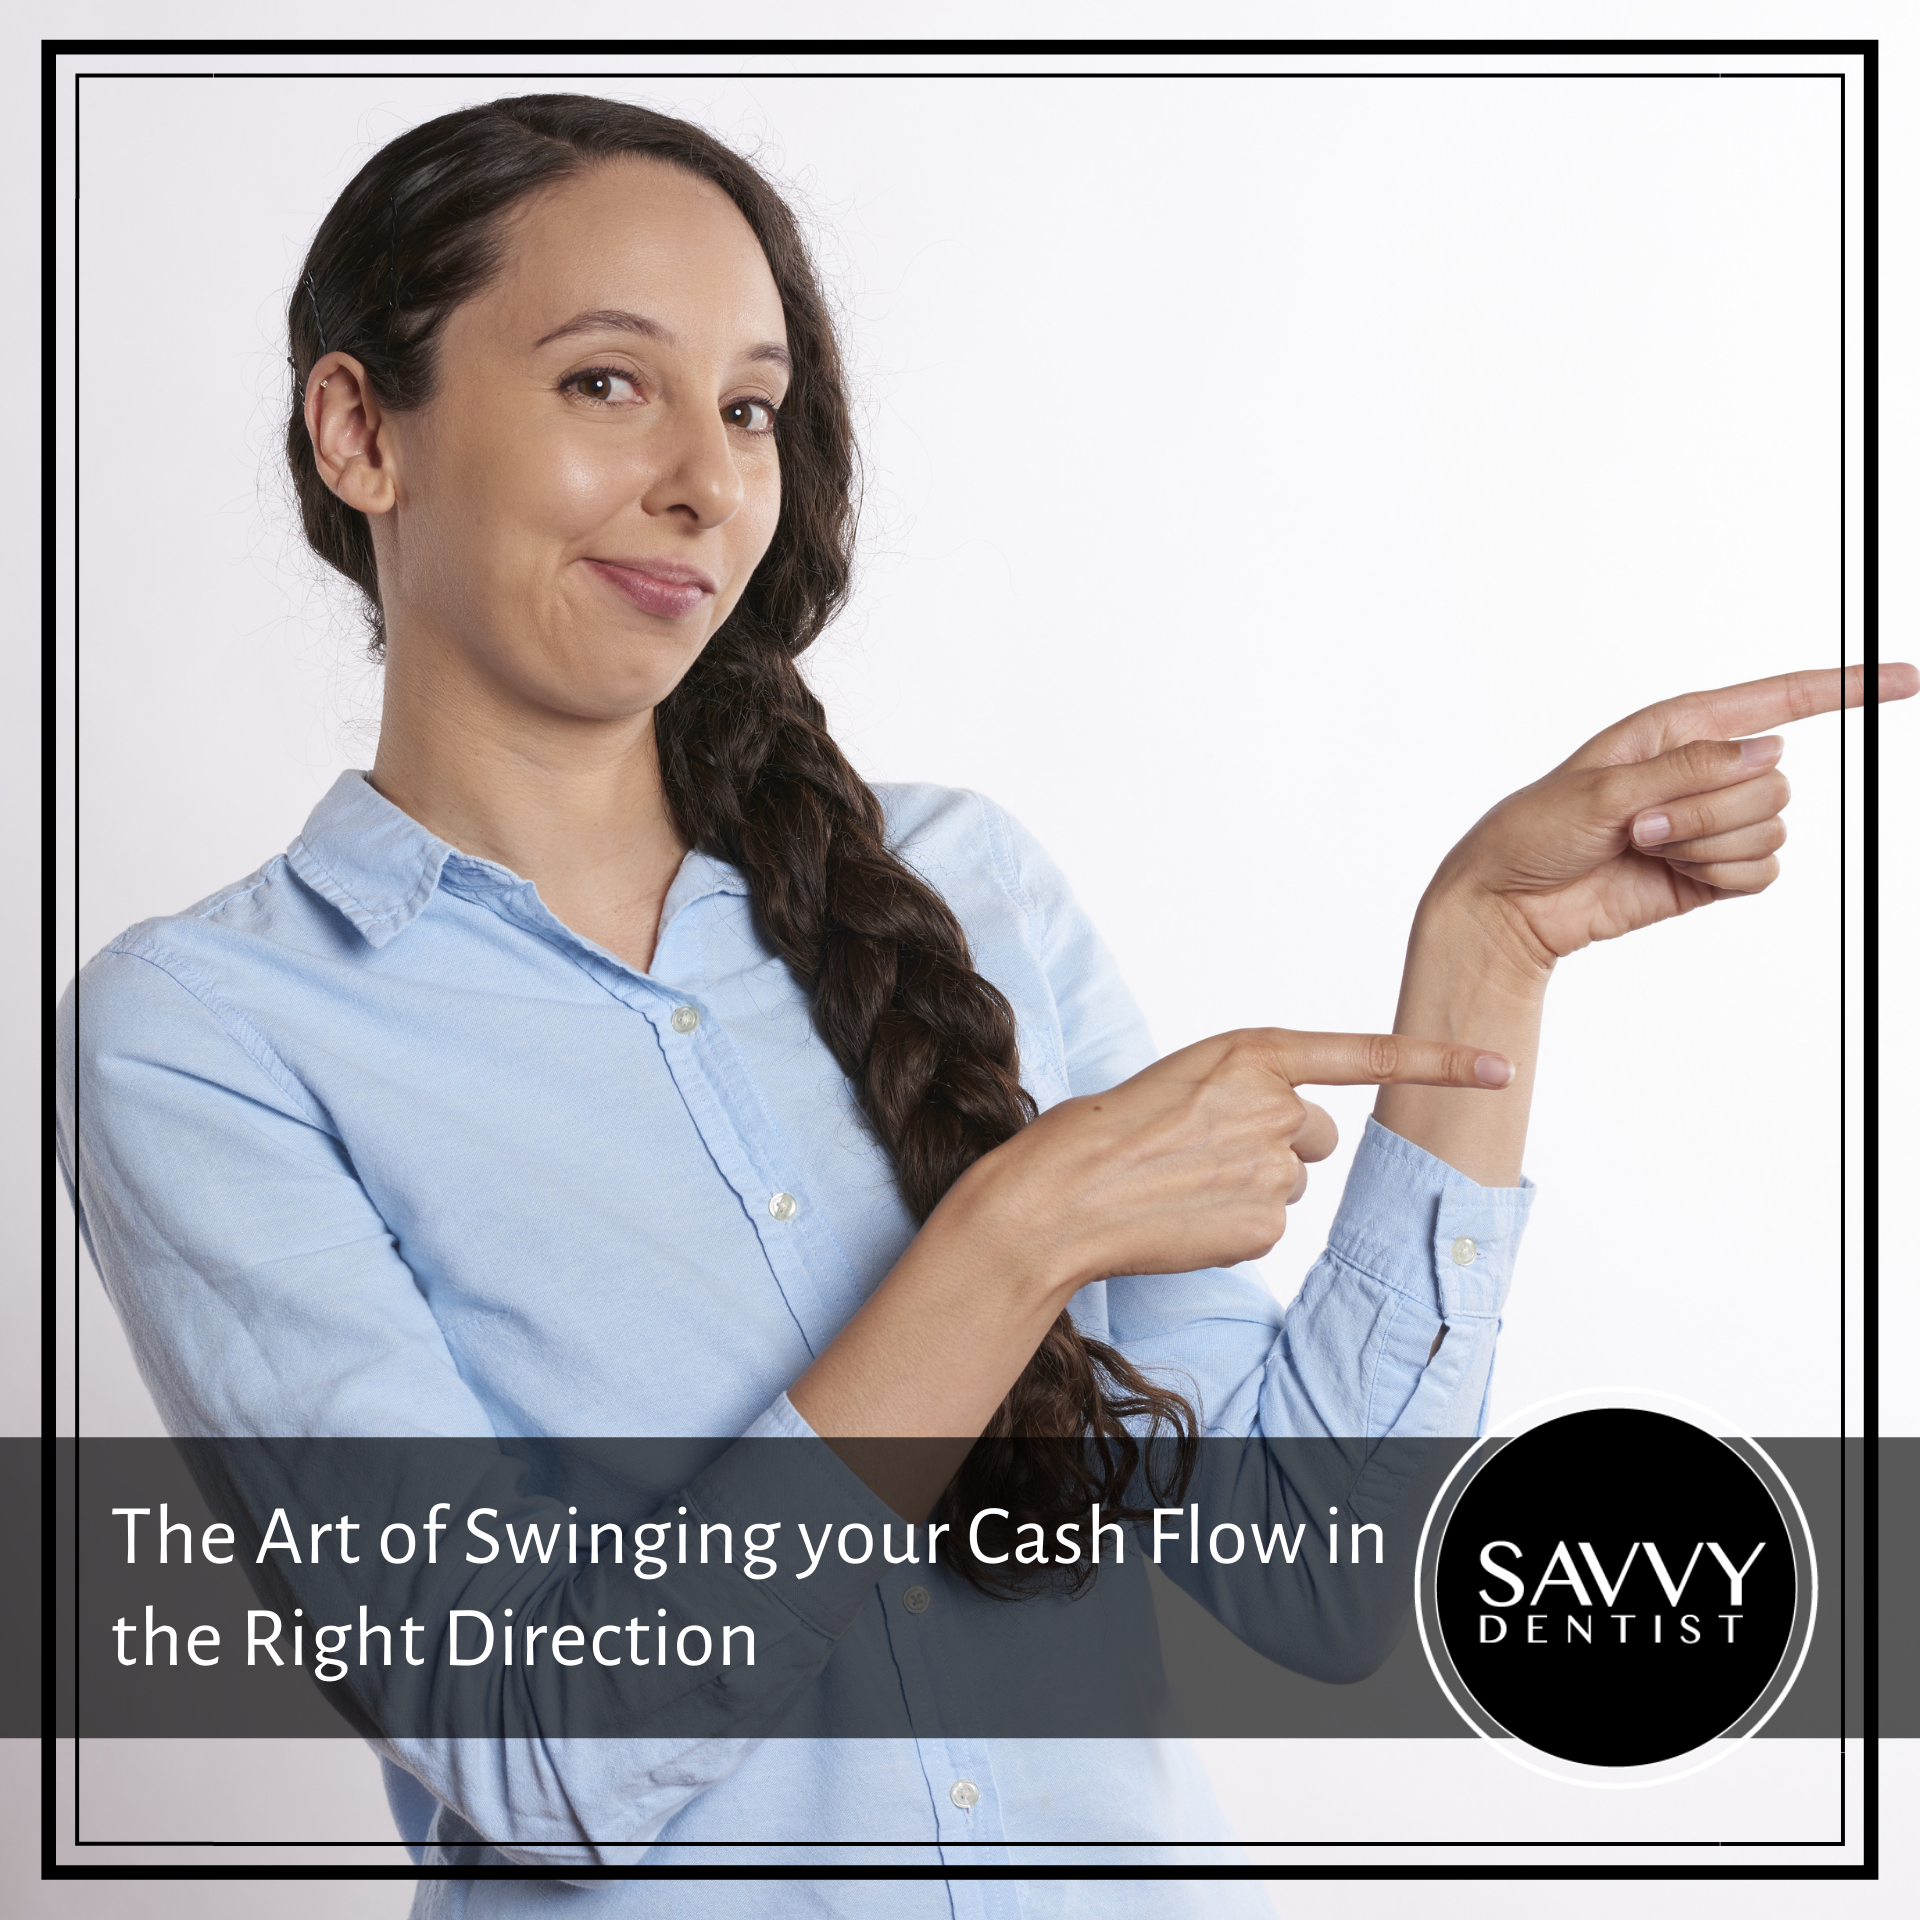 The Art of Swinging Your Cash flow in the Right Direction